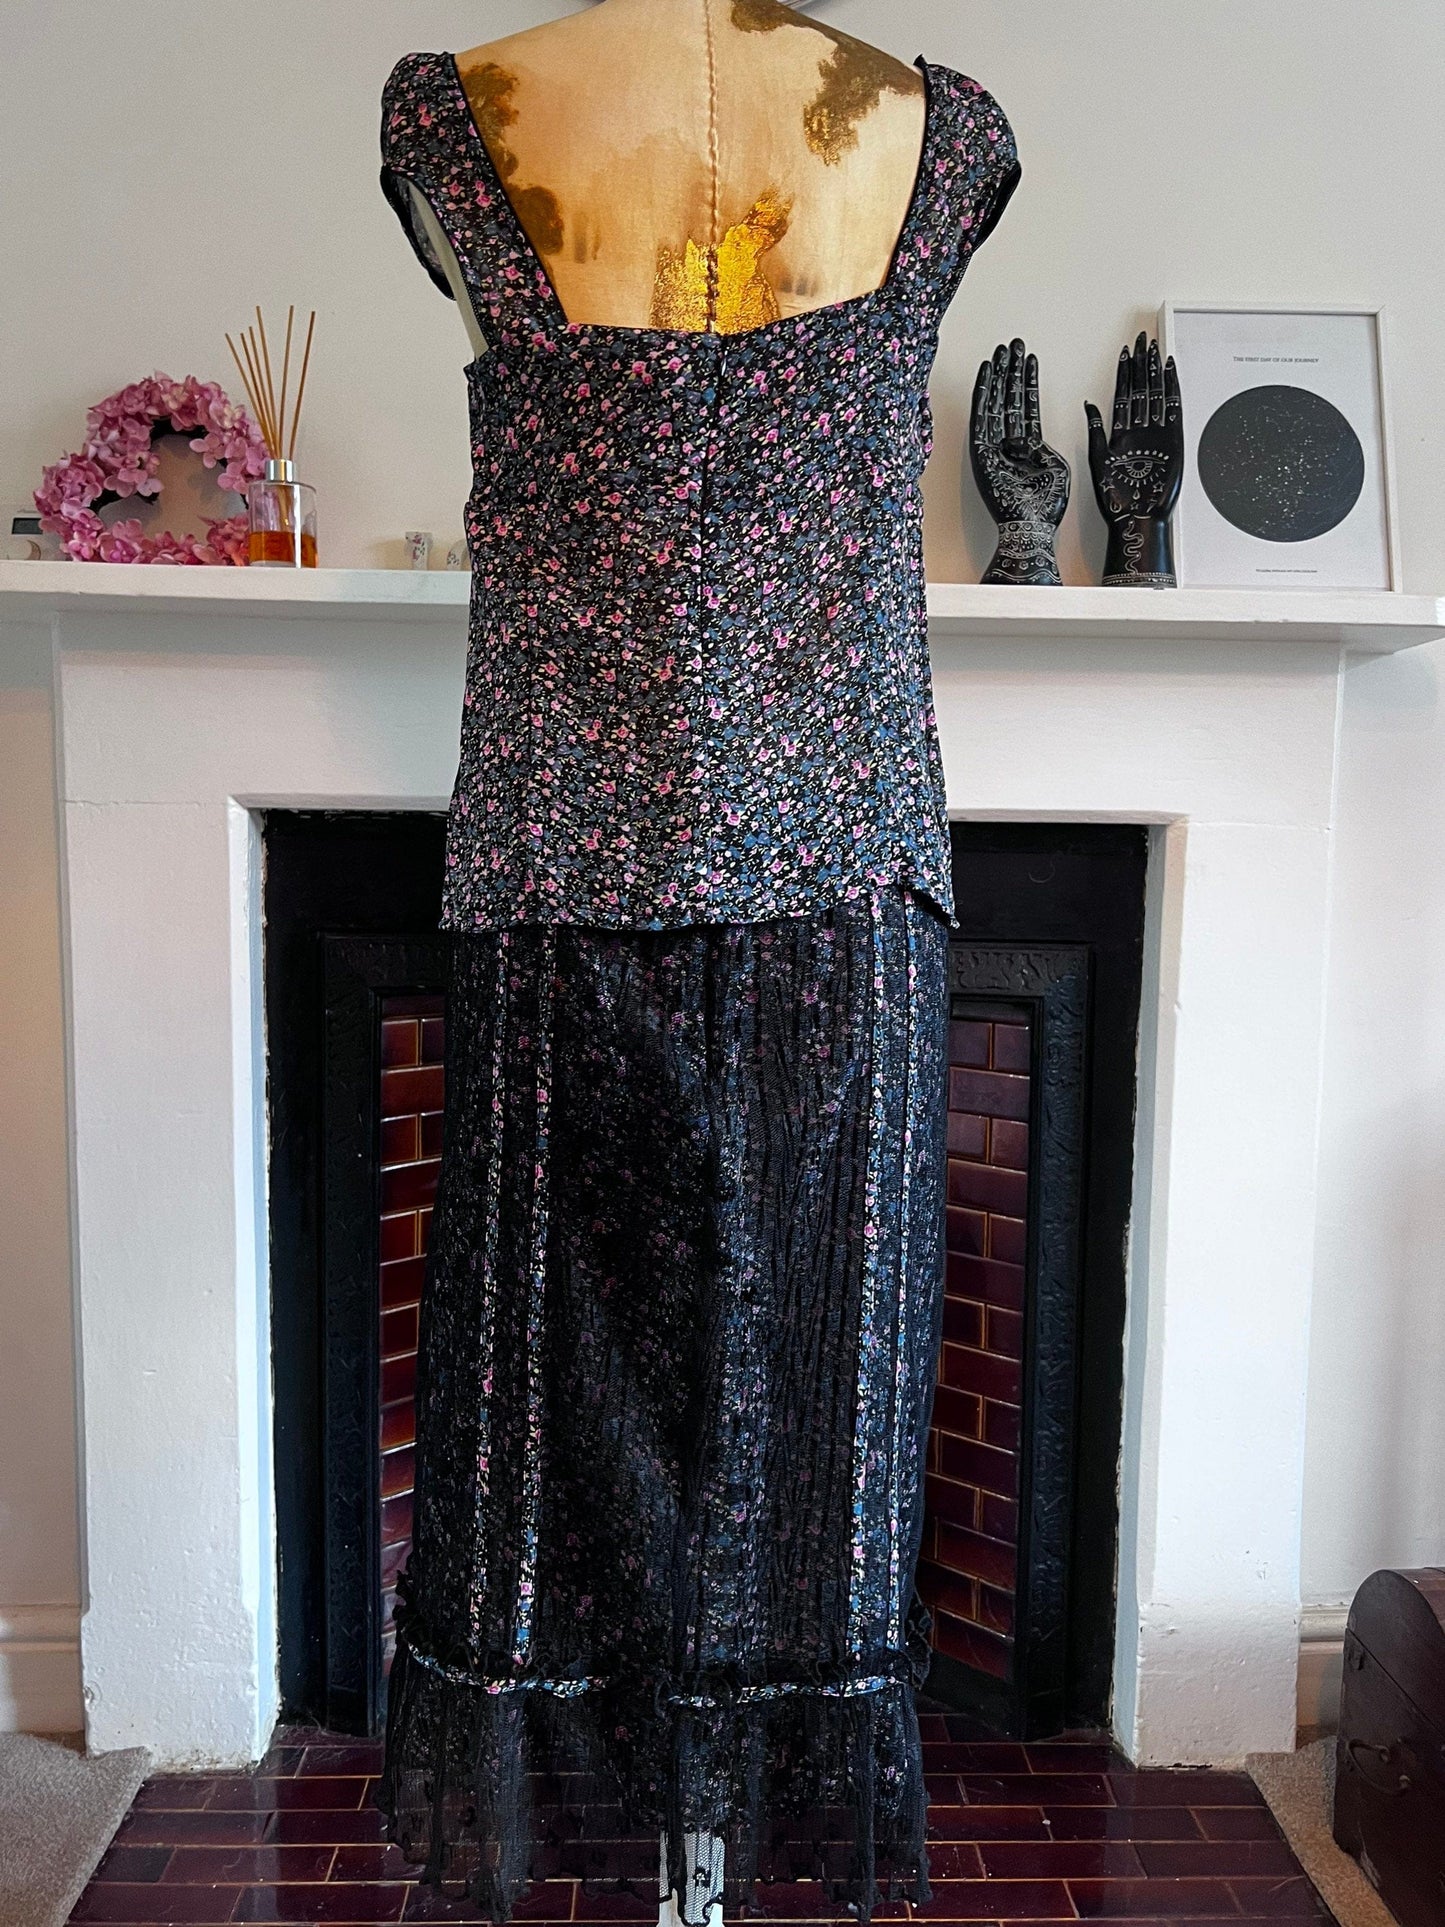 Vintage Karen Millen two peice skirt and top set - mini floral design with lace overlay skirt UK14/UK12 - Ditsy Floral